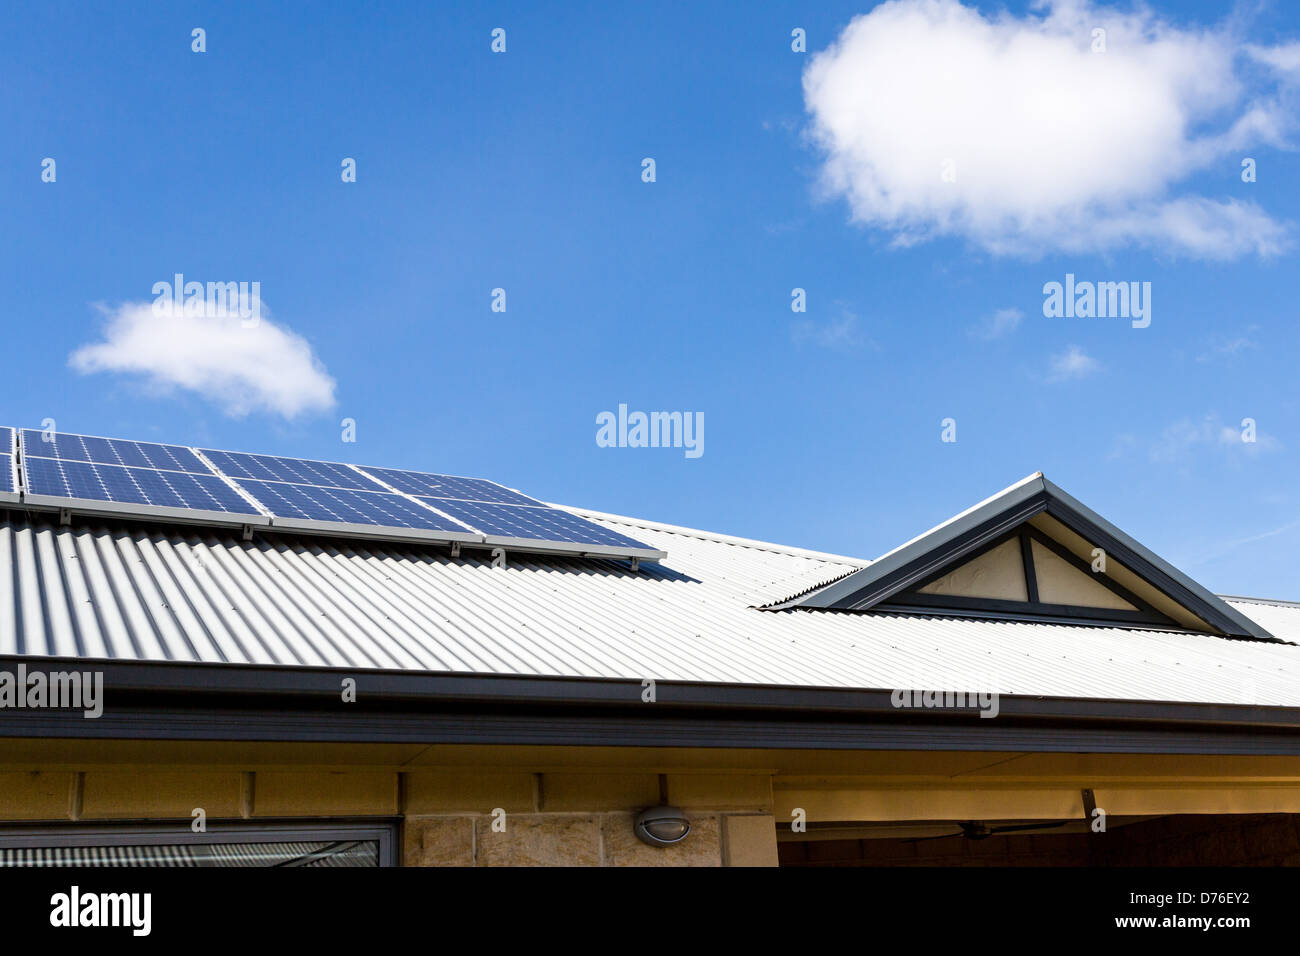 Gable on Colorbond Steel Roof with solar panels Stock Photo